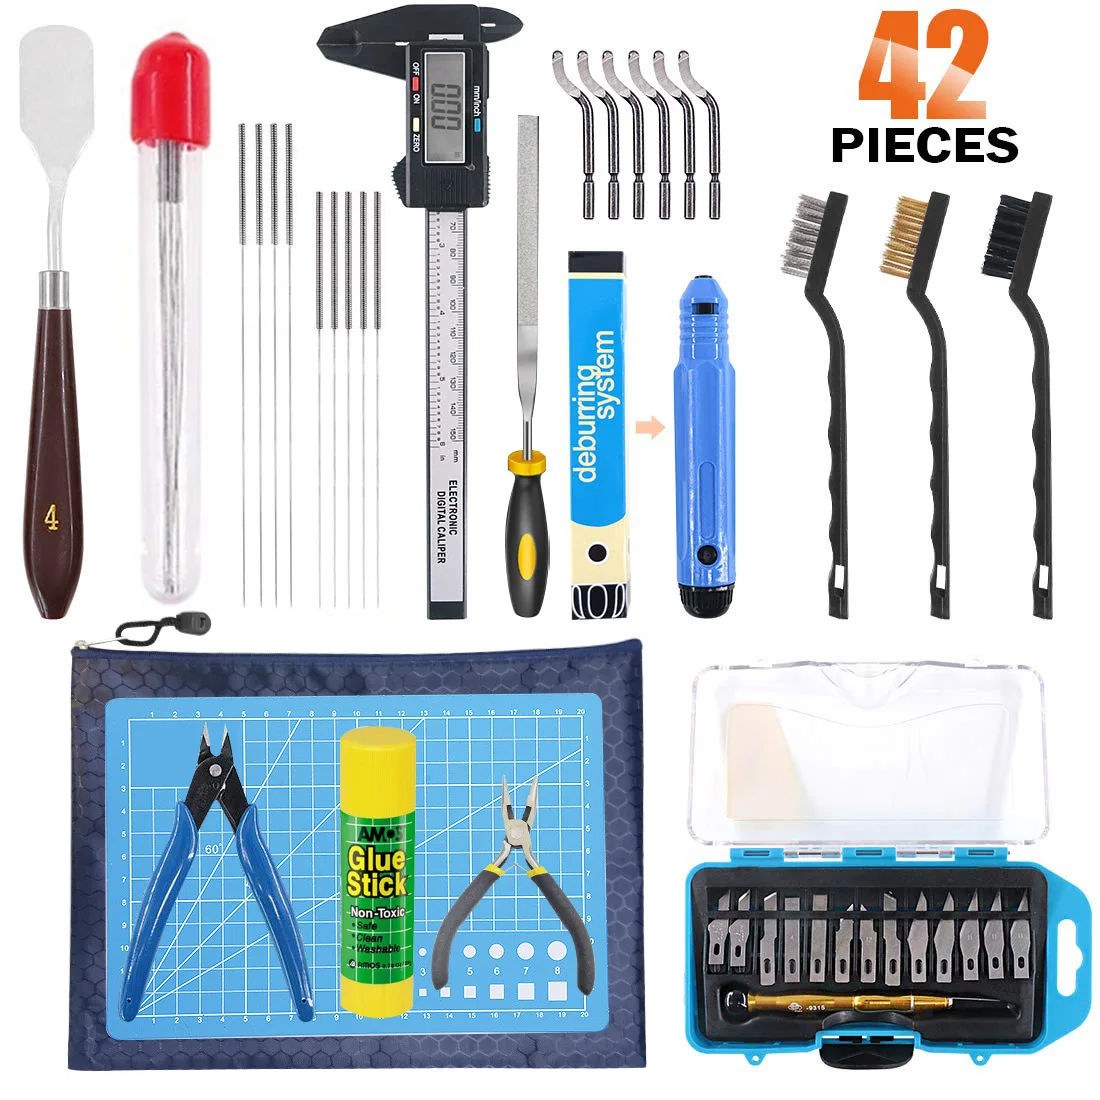 42Pcs 3D Printer Hot Bed Cleaning Tool Nozzle Cleaning and Disassembly Tools DIY Printer Accessories Kit